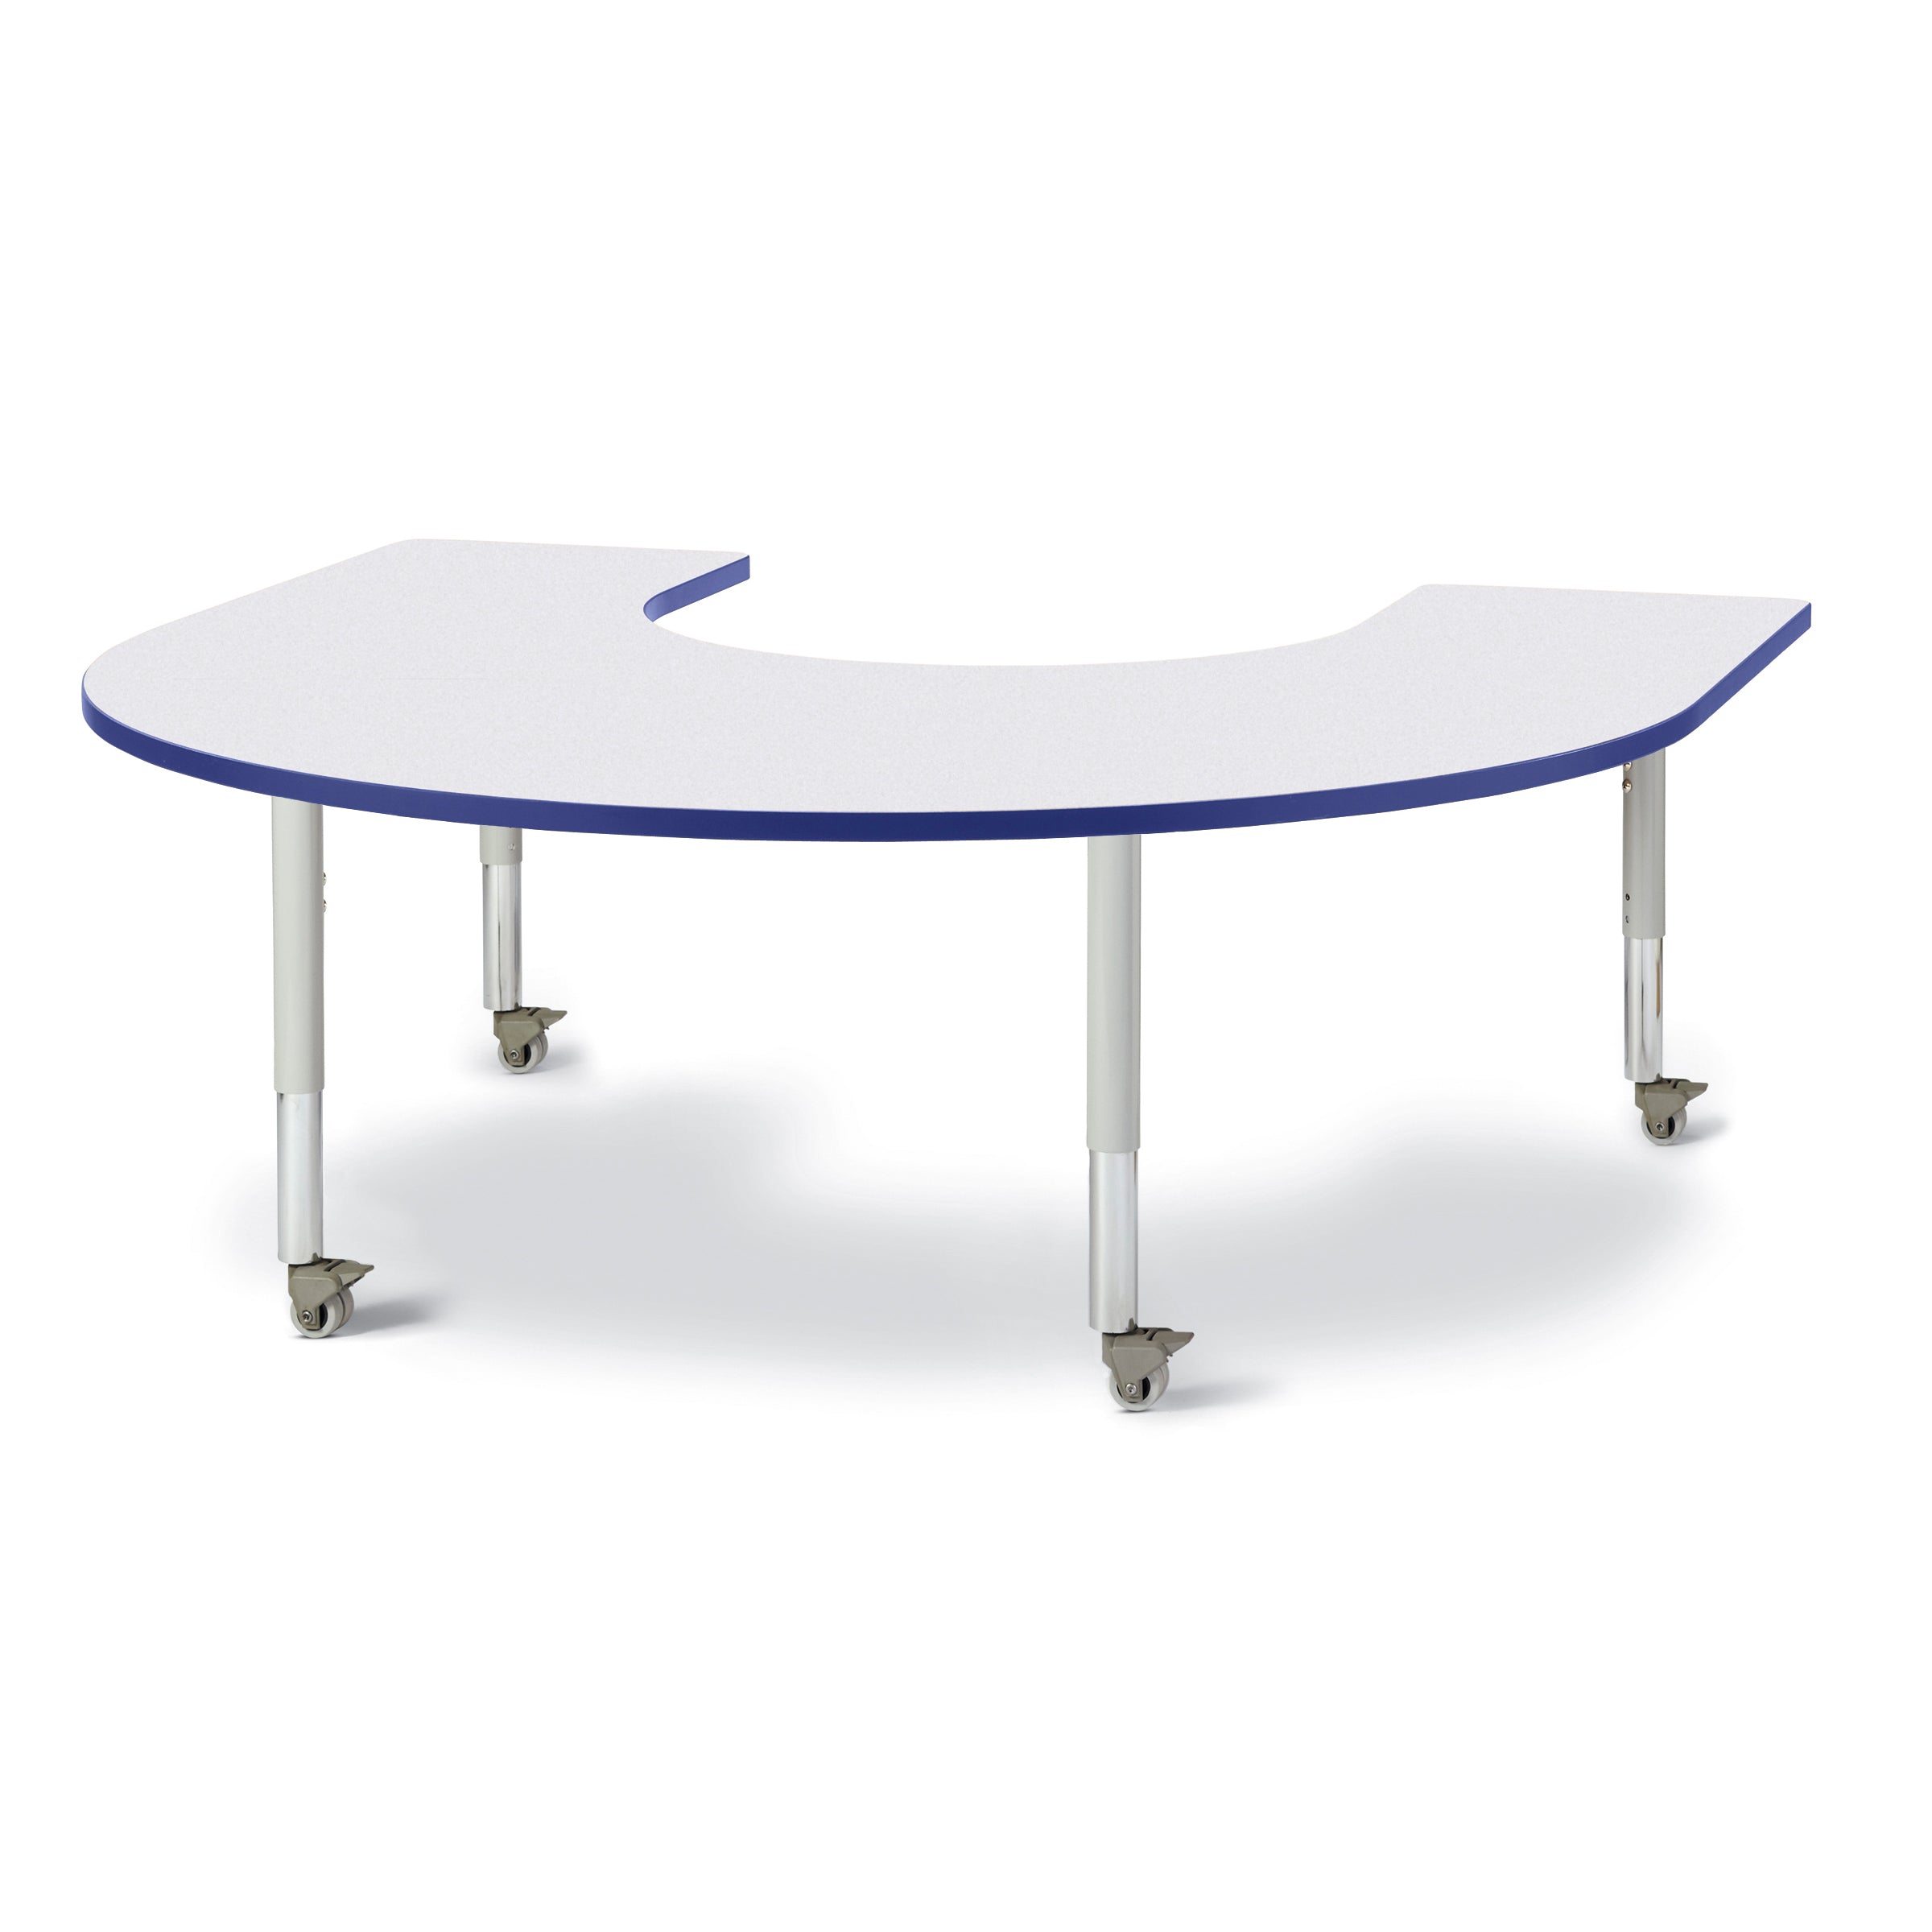 6445JCM003, Berries Horseshoe Activity Table - 66" X 60", Mobile - Freckled Gray/Blue/Gray